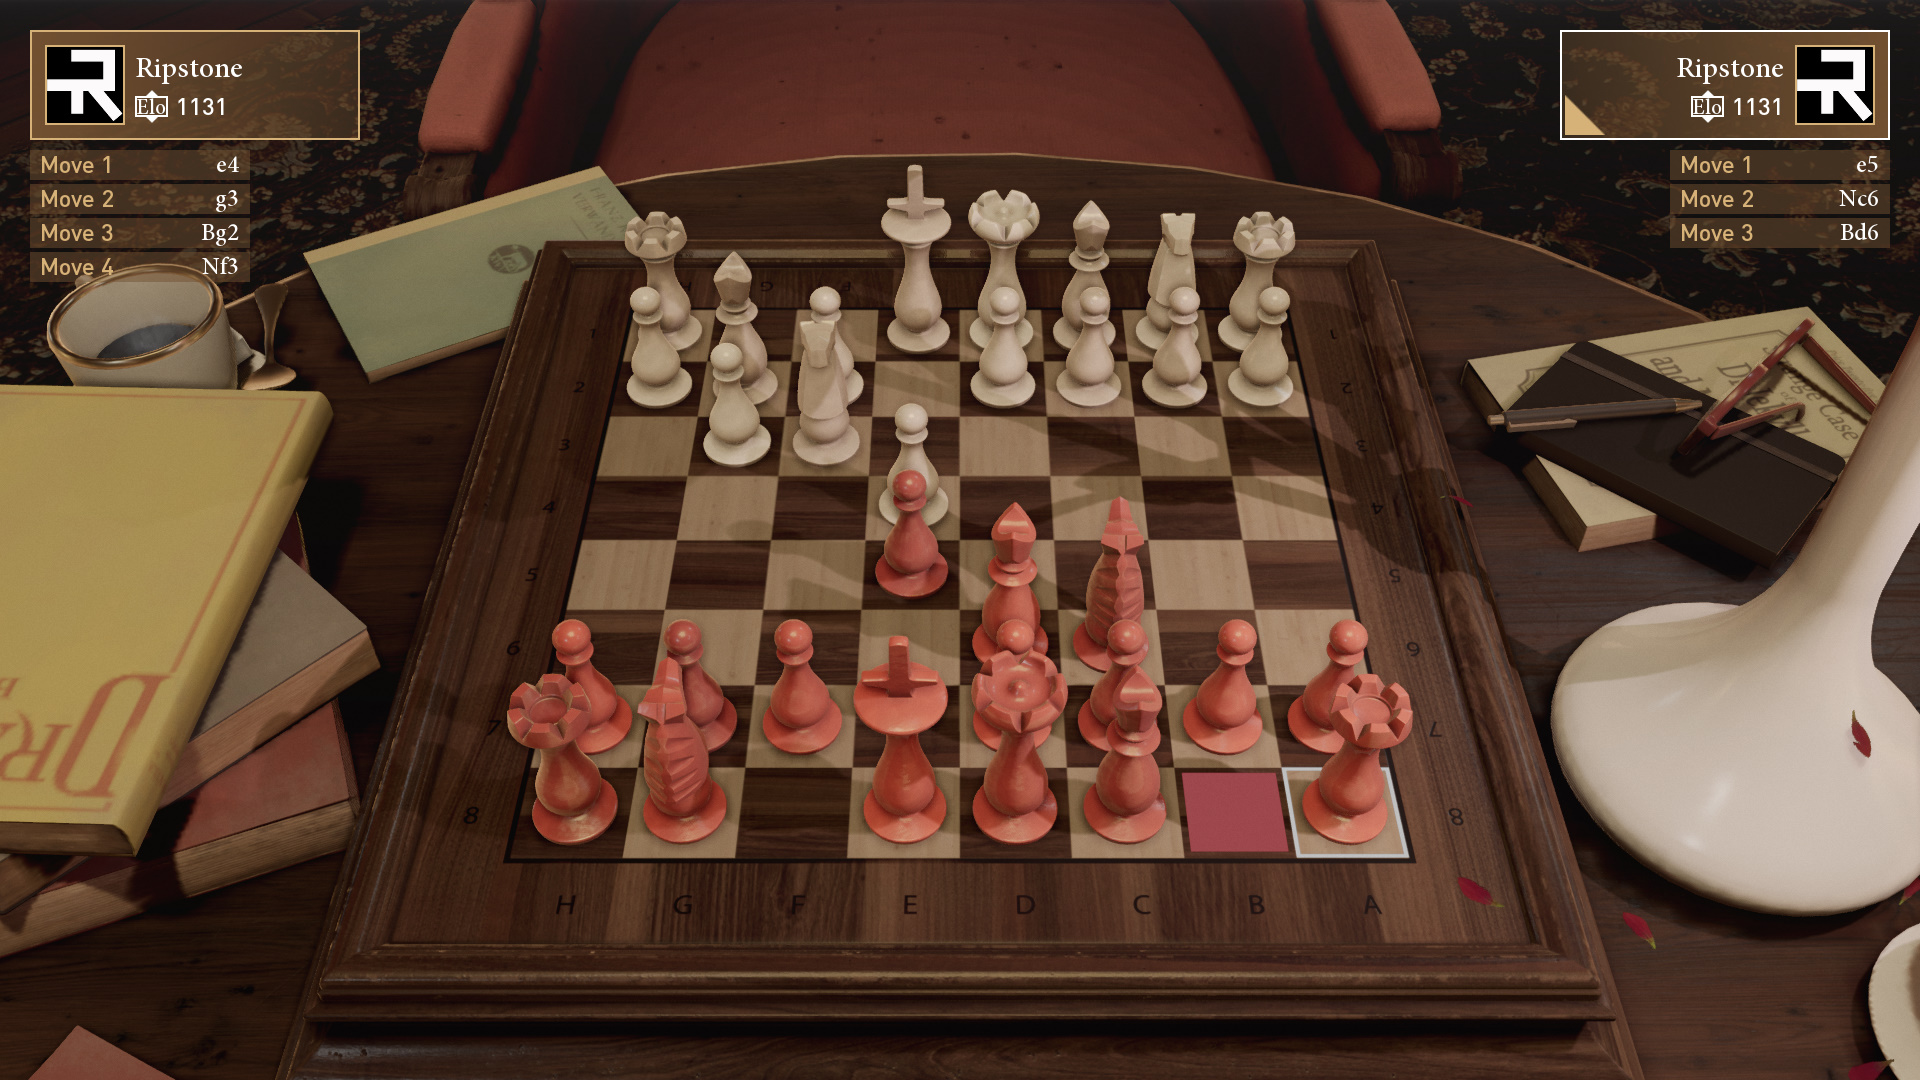 Chess Ultra Captures a Spot on Switch This Year